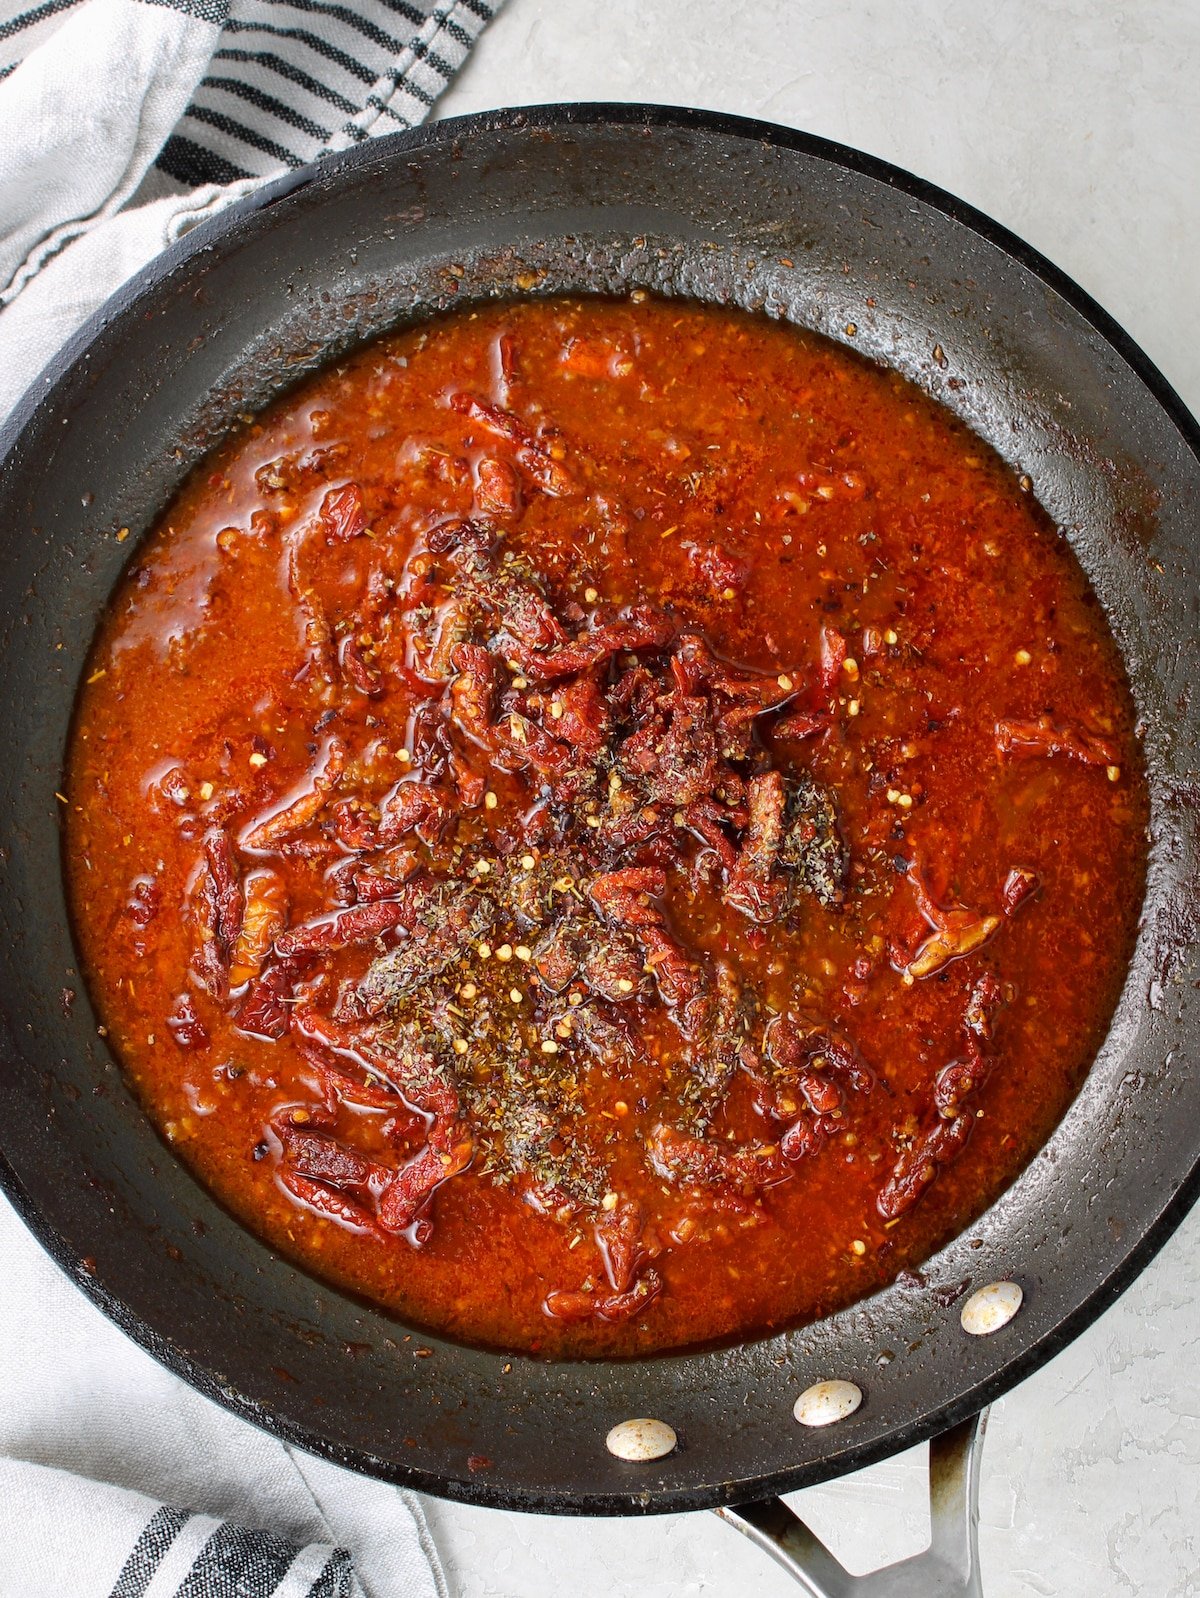 A saute pan with chicken stock, sun-dried tomatoes, spices, and herbs.